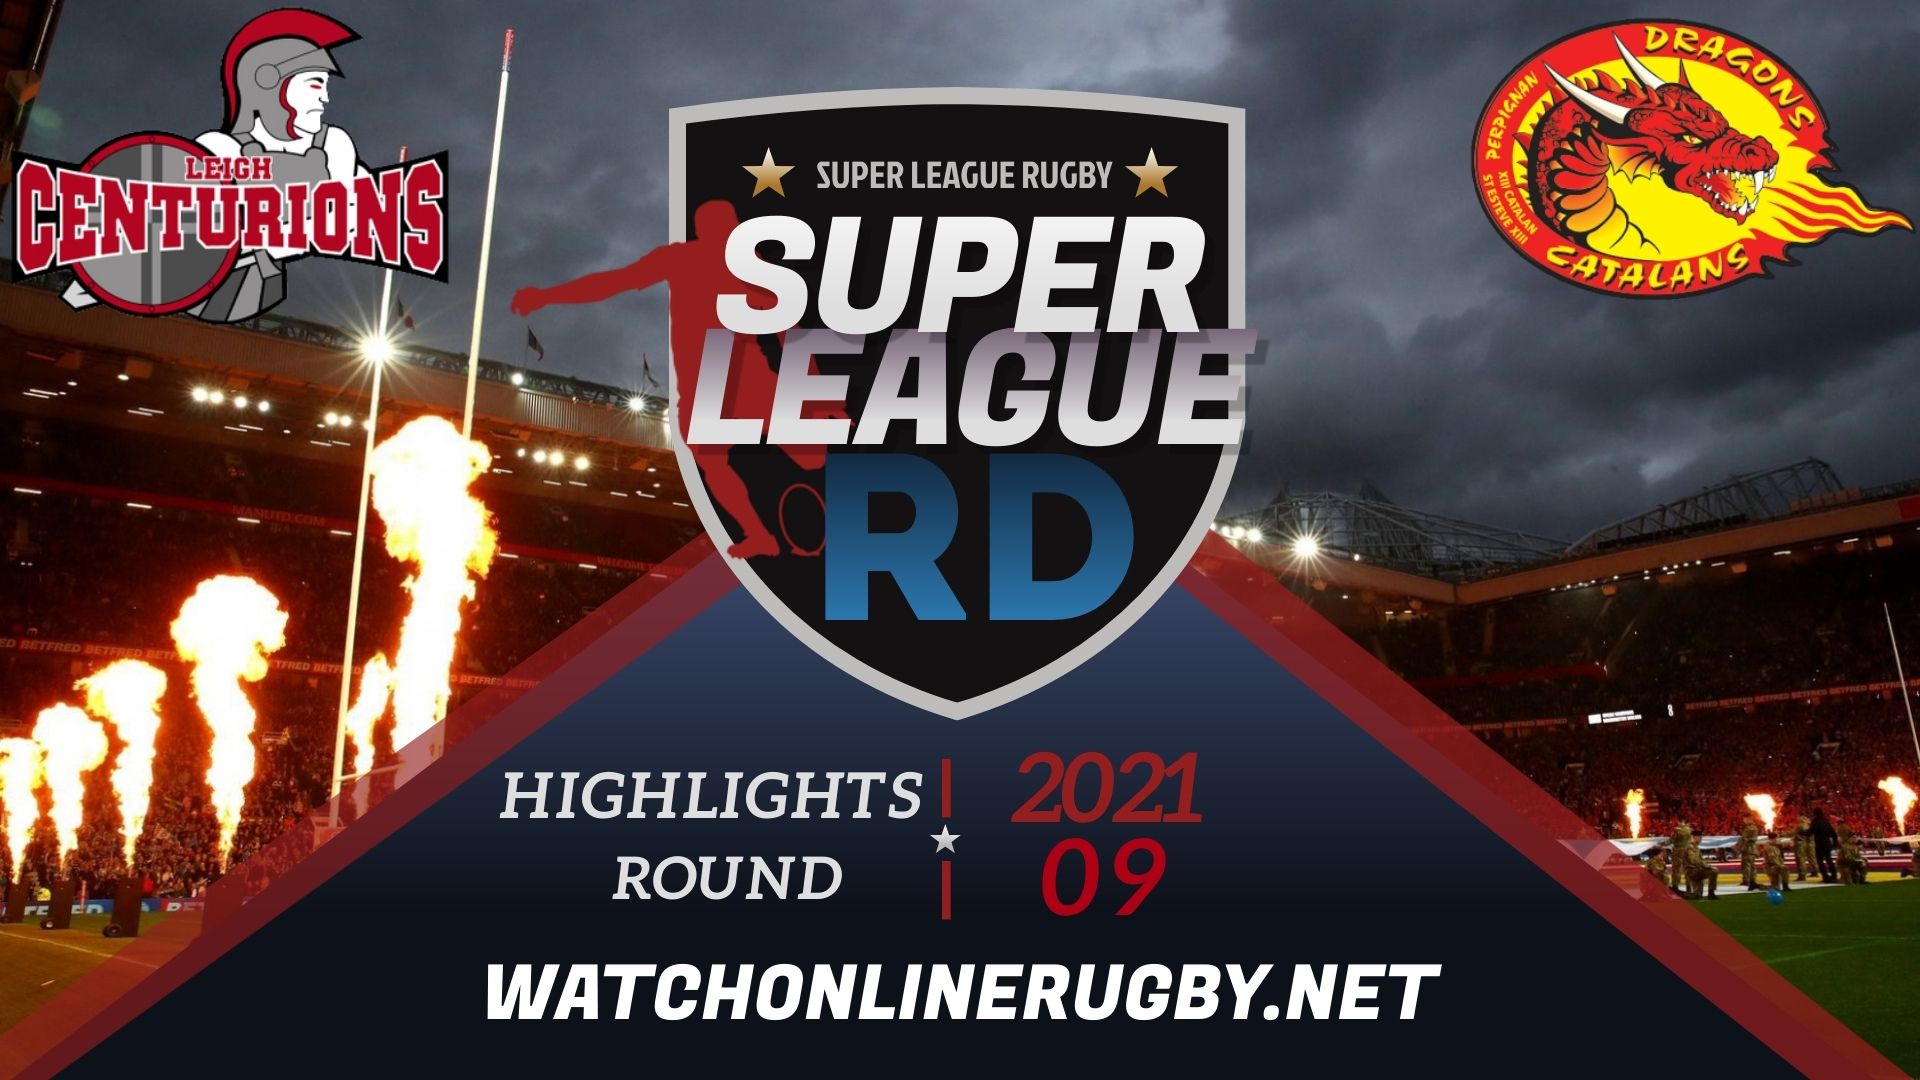 Leigh Centurions Vs Catalans Dragons Super League Rugby 2021 RD 9